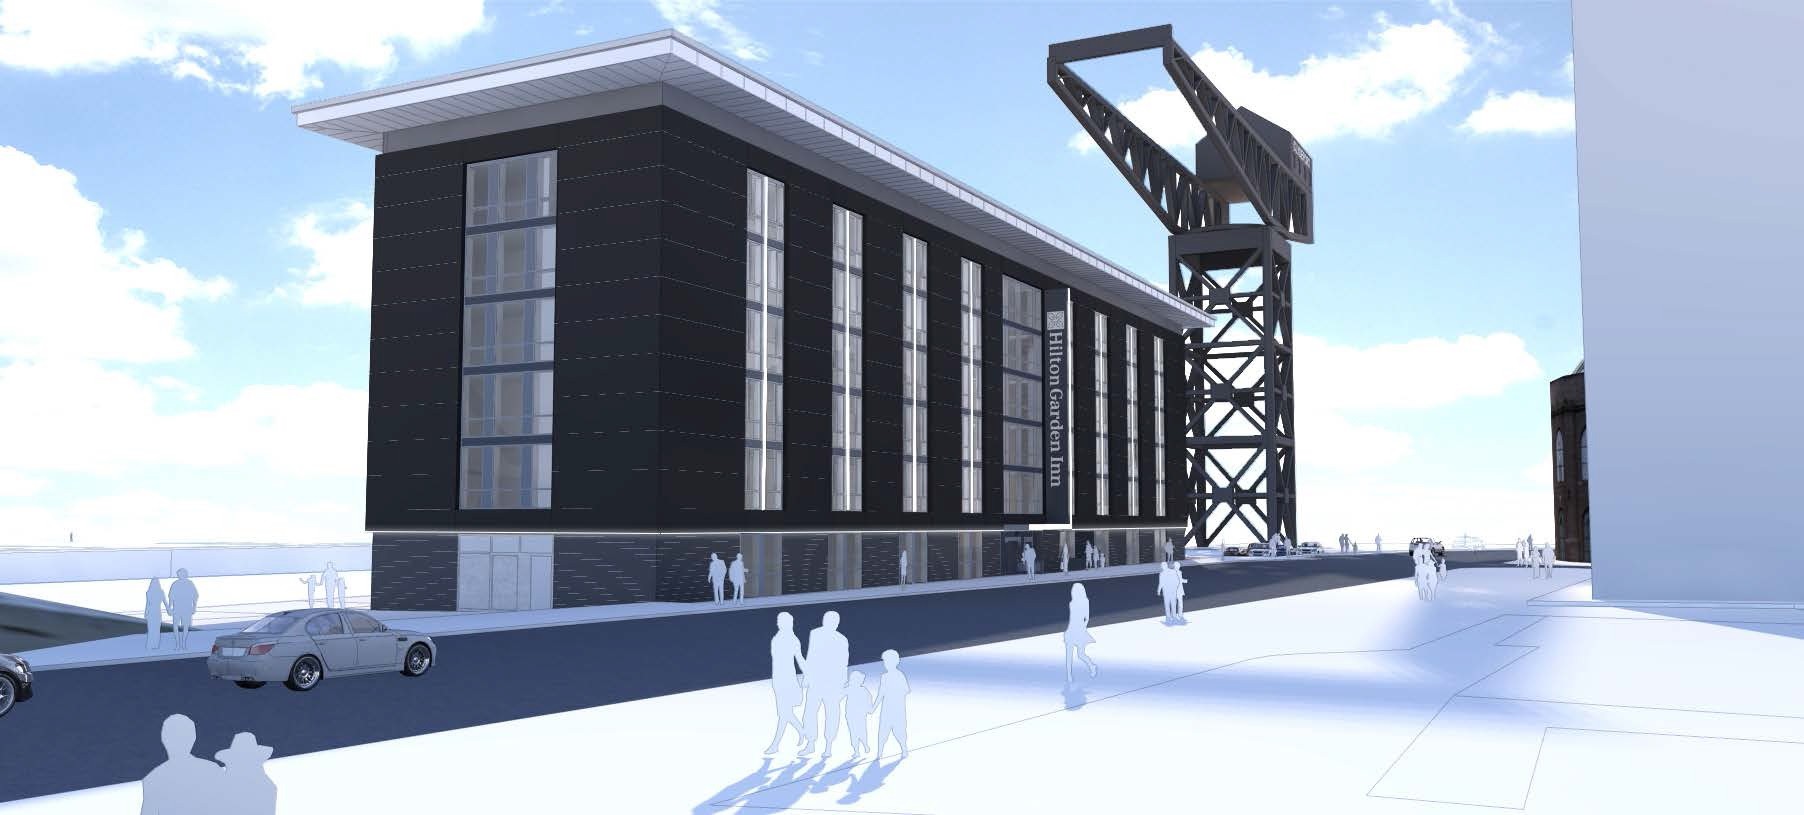 ‘Jewel box’ recladding plan to boost fire safety at Finnieston Quay hotel